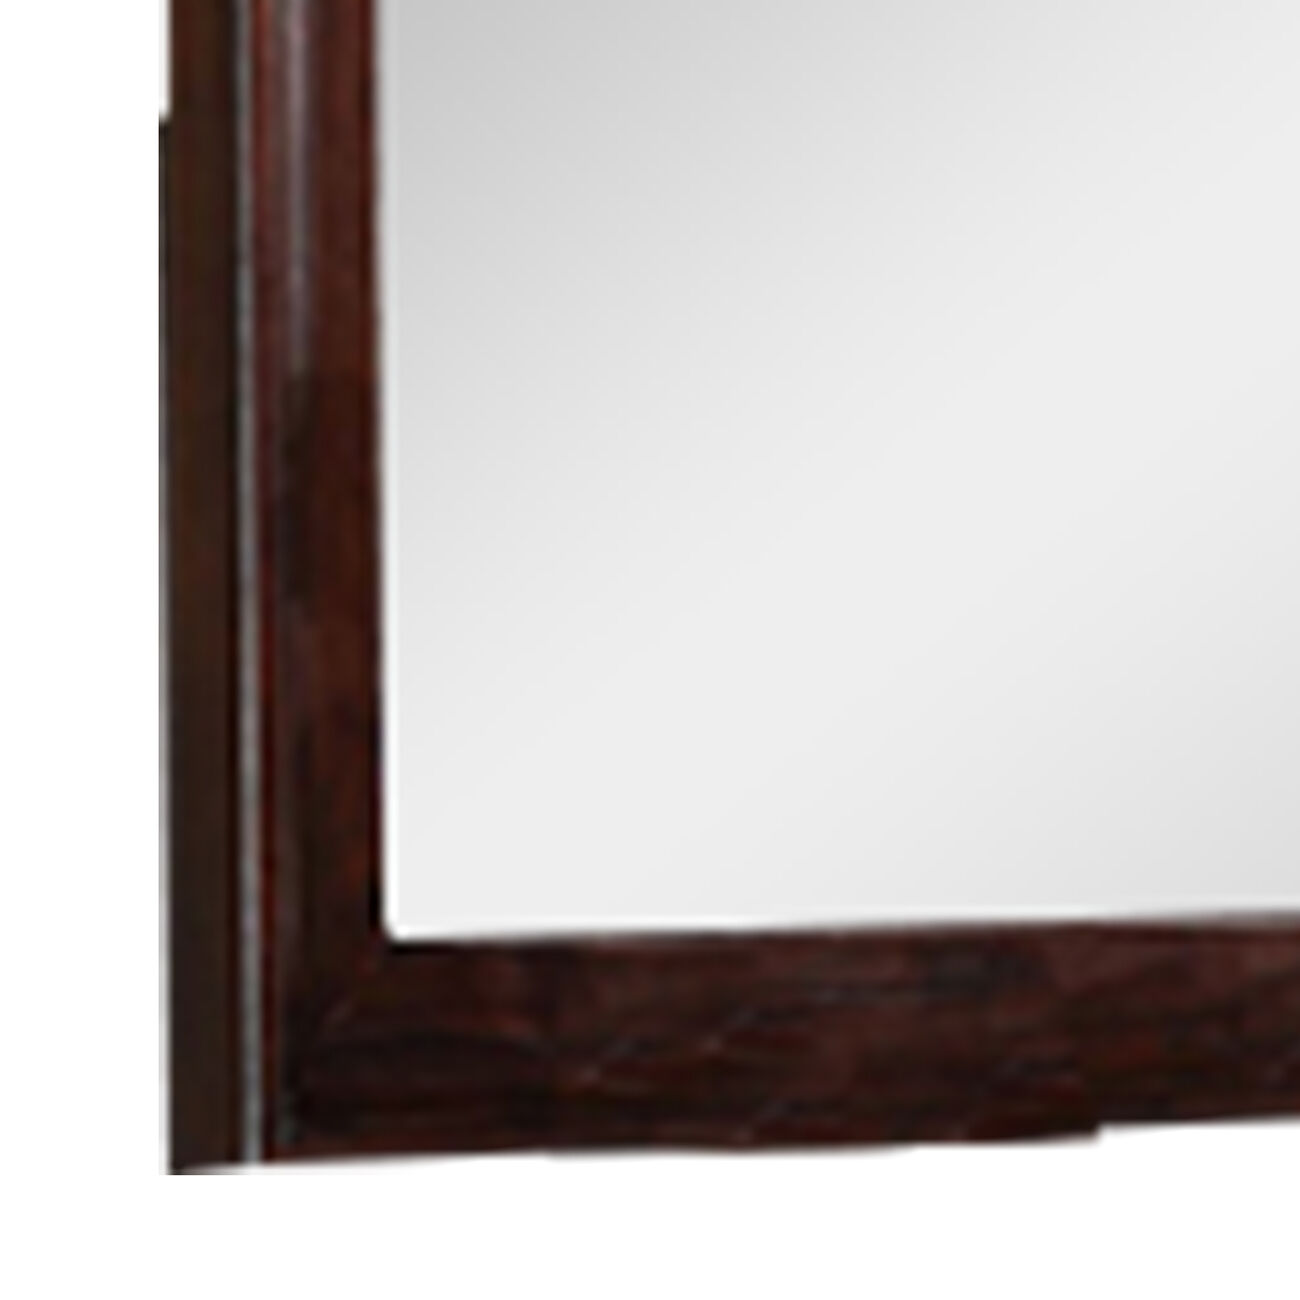 Crown Design Dresser Top Beveled Mirror with Wooden Frame, Brown and Silver